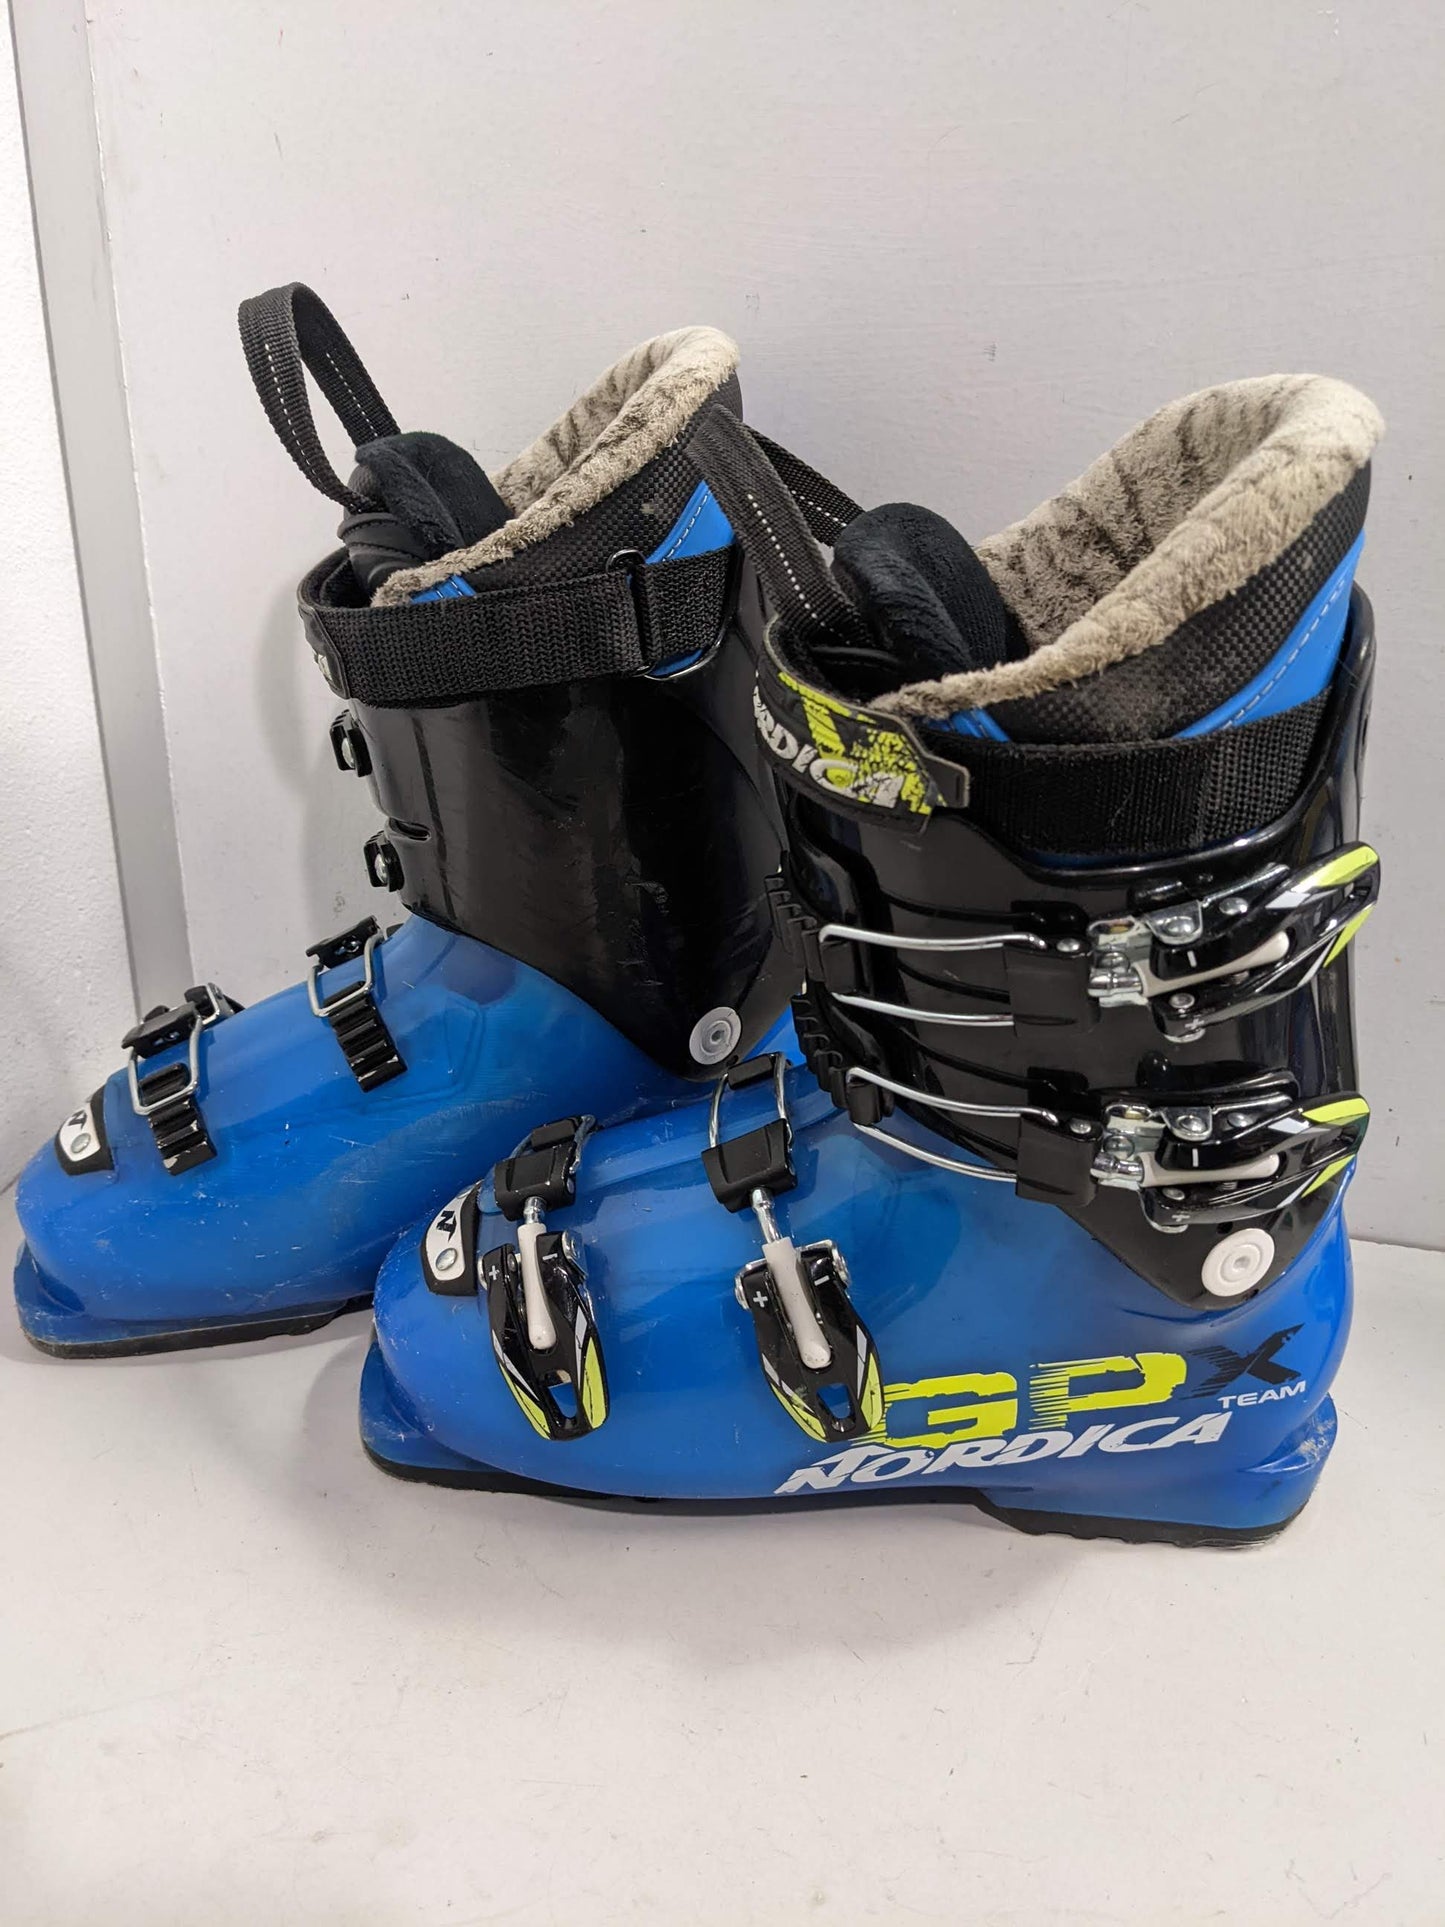 Nordica GPX Team Ski Boots size 24 Blue Used